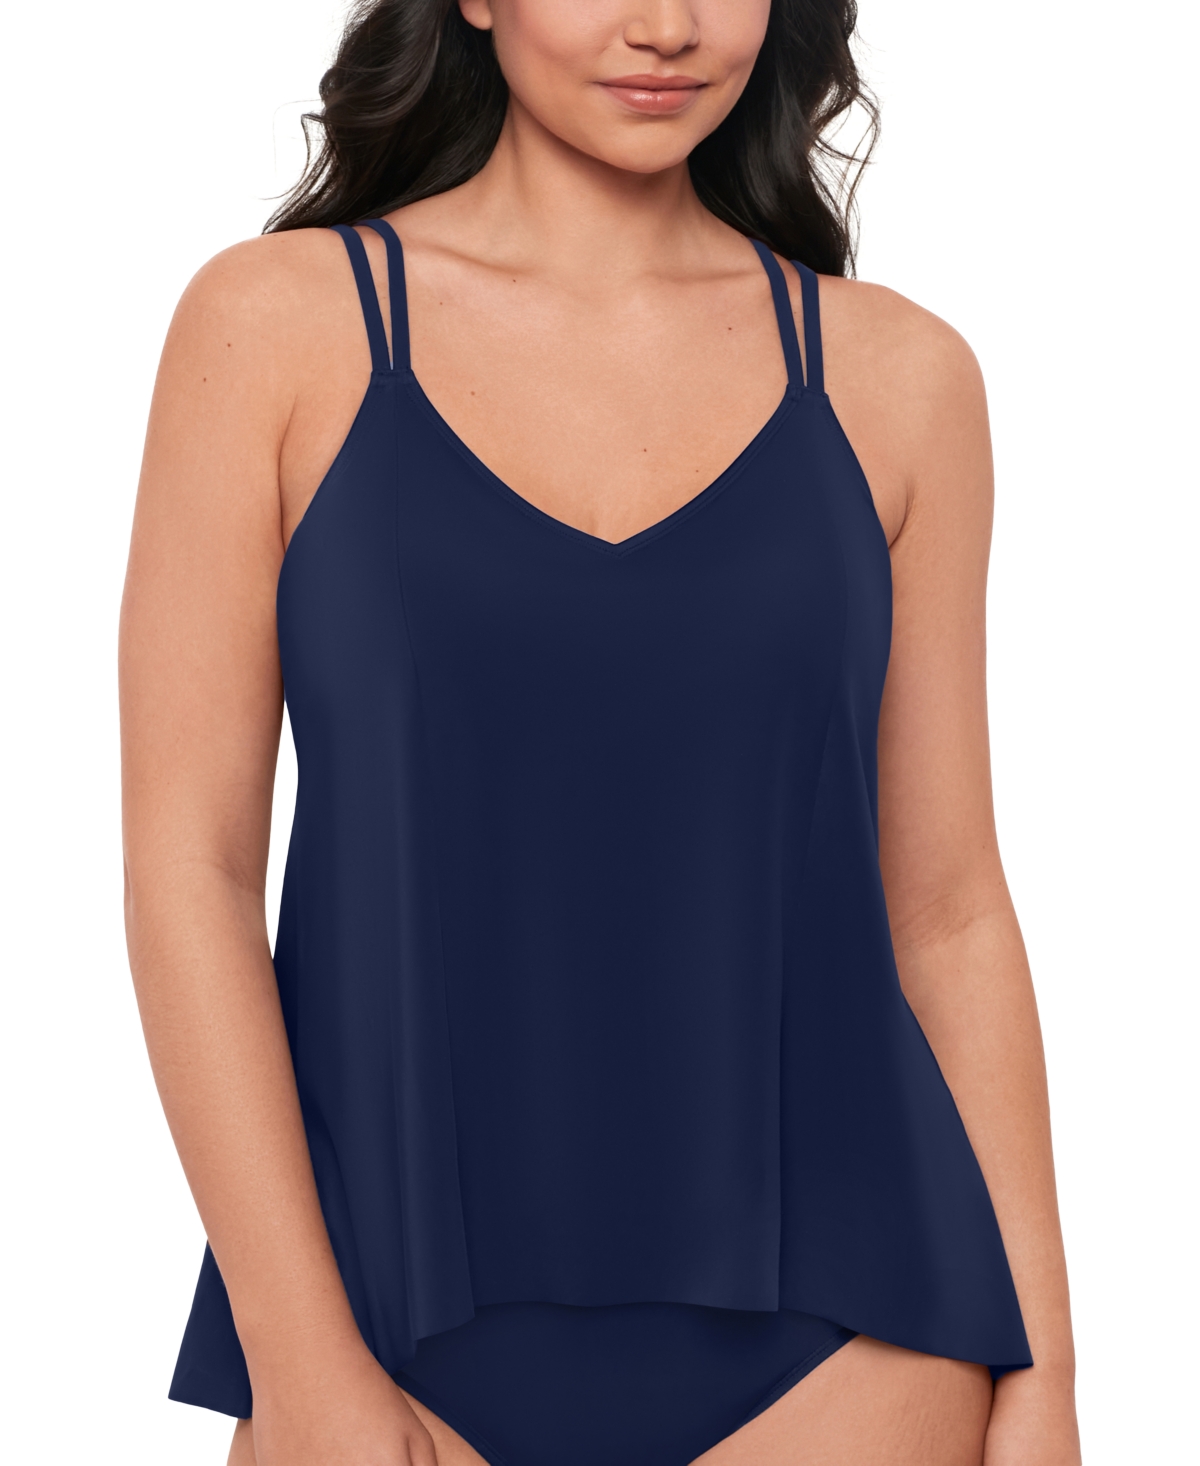 Women's Midnight Princess High-Low Tankini Top, Created for Macy's - Navy Blue